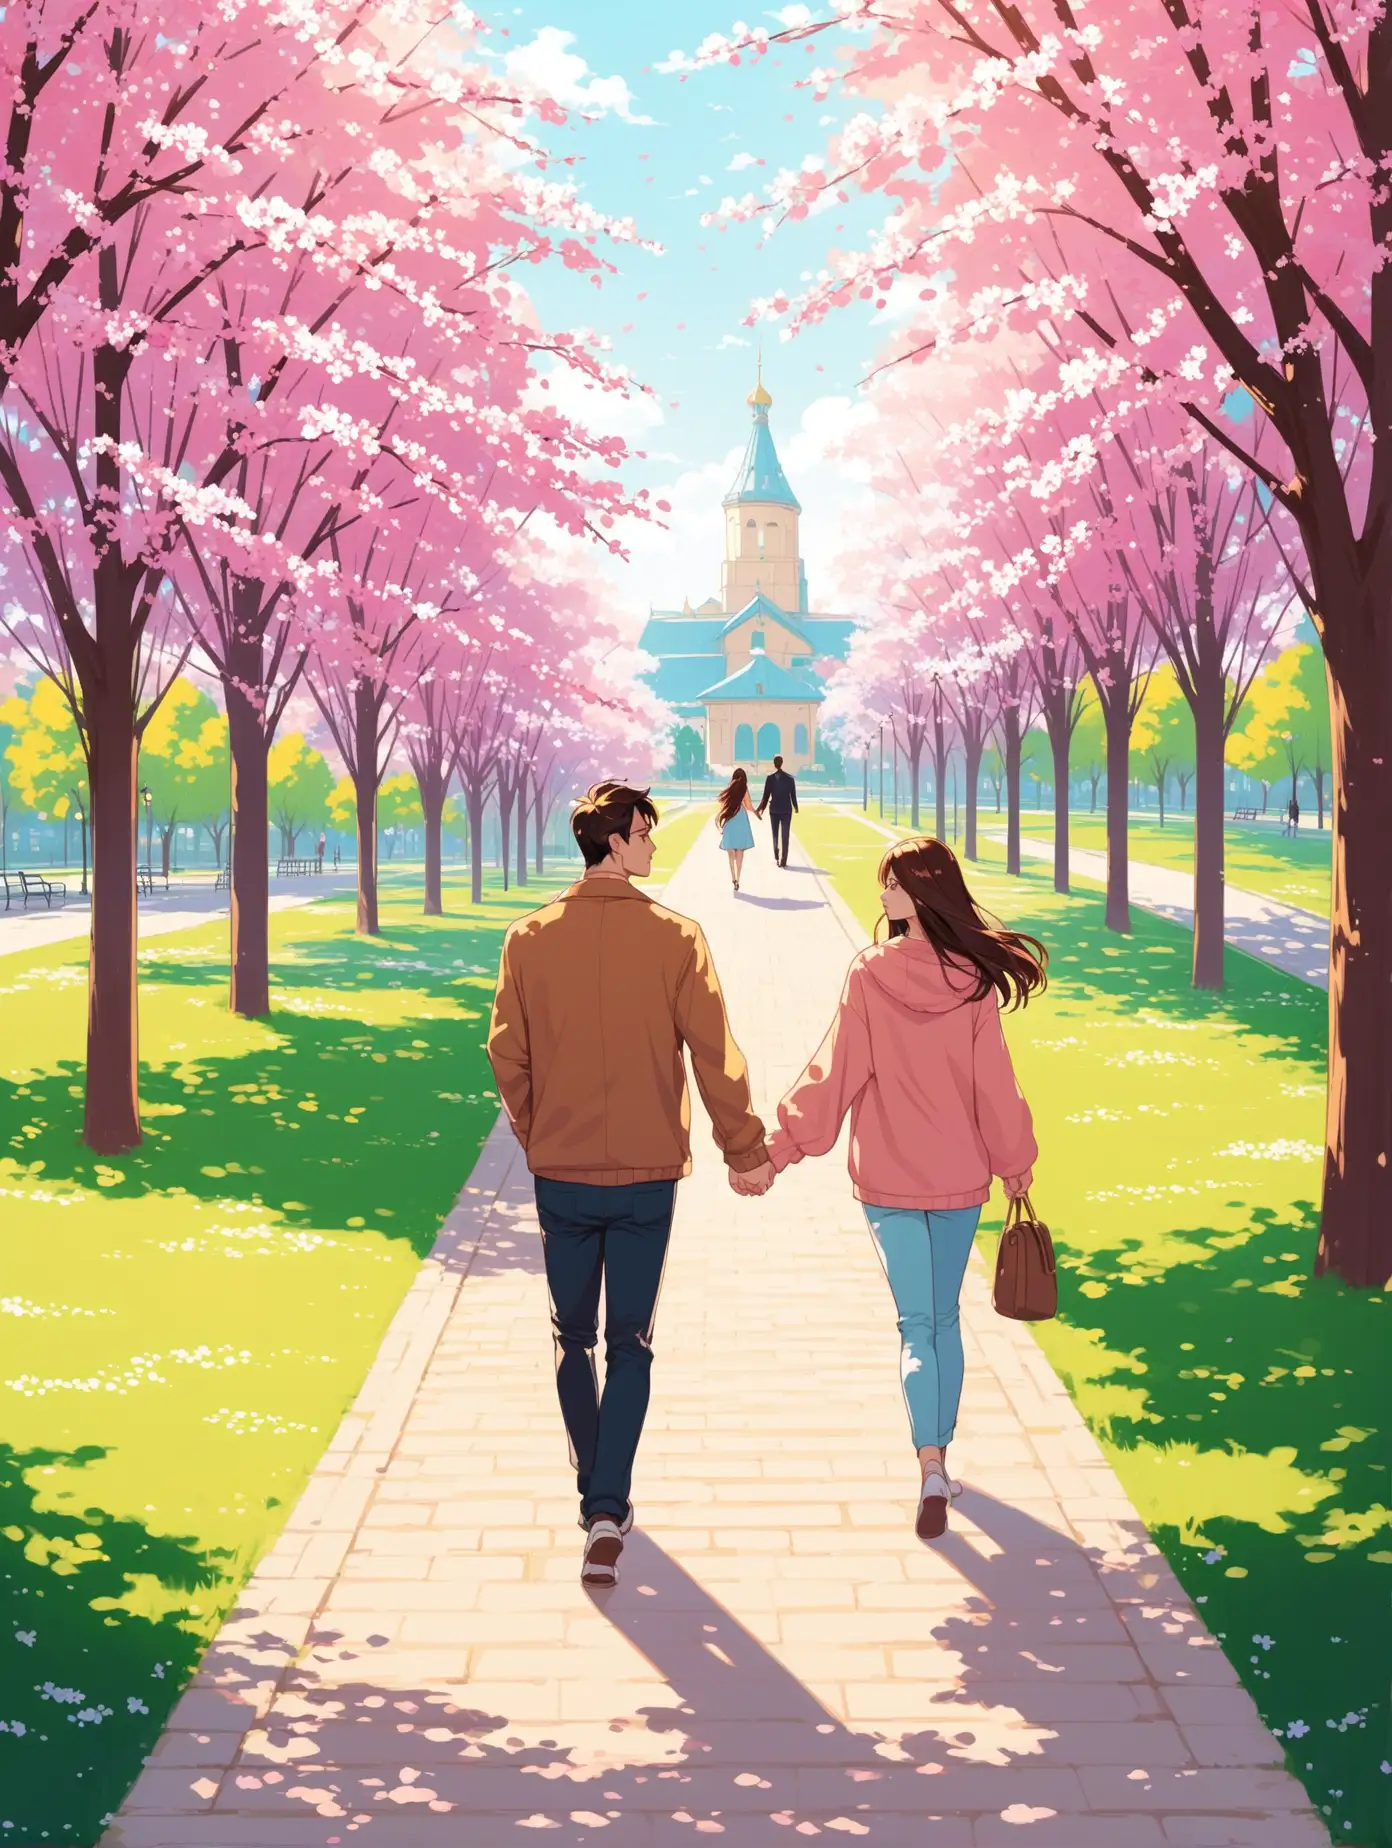 A girl walks with her boyfriend in a spring city park